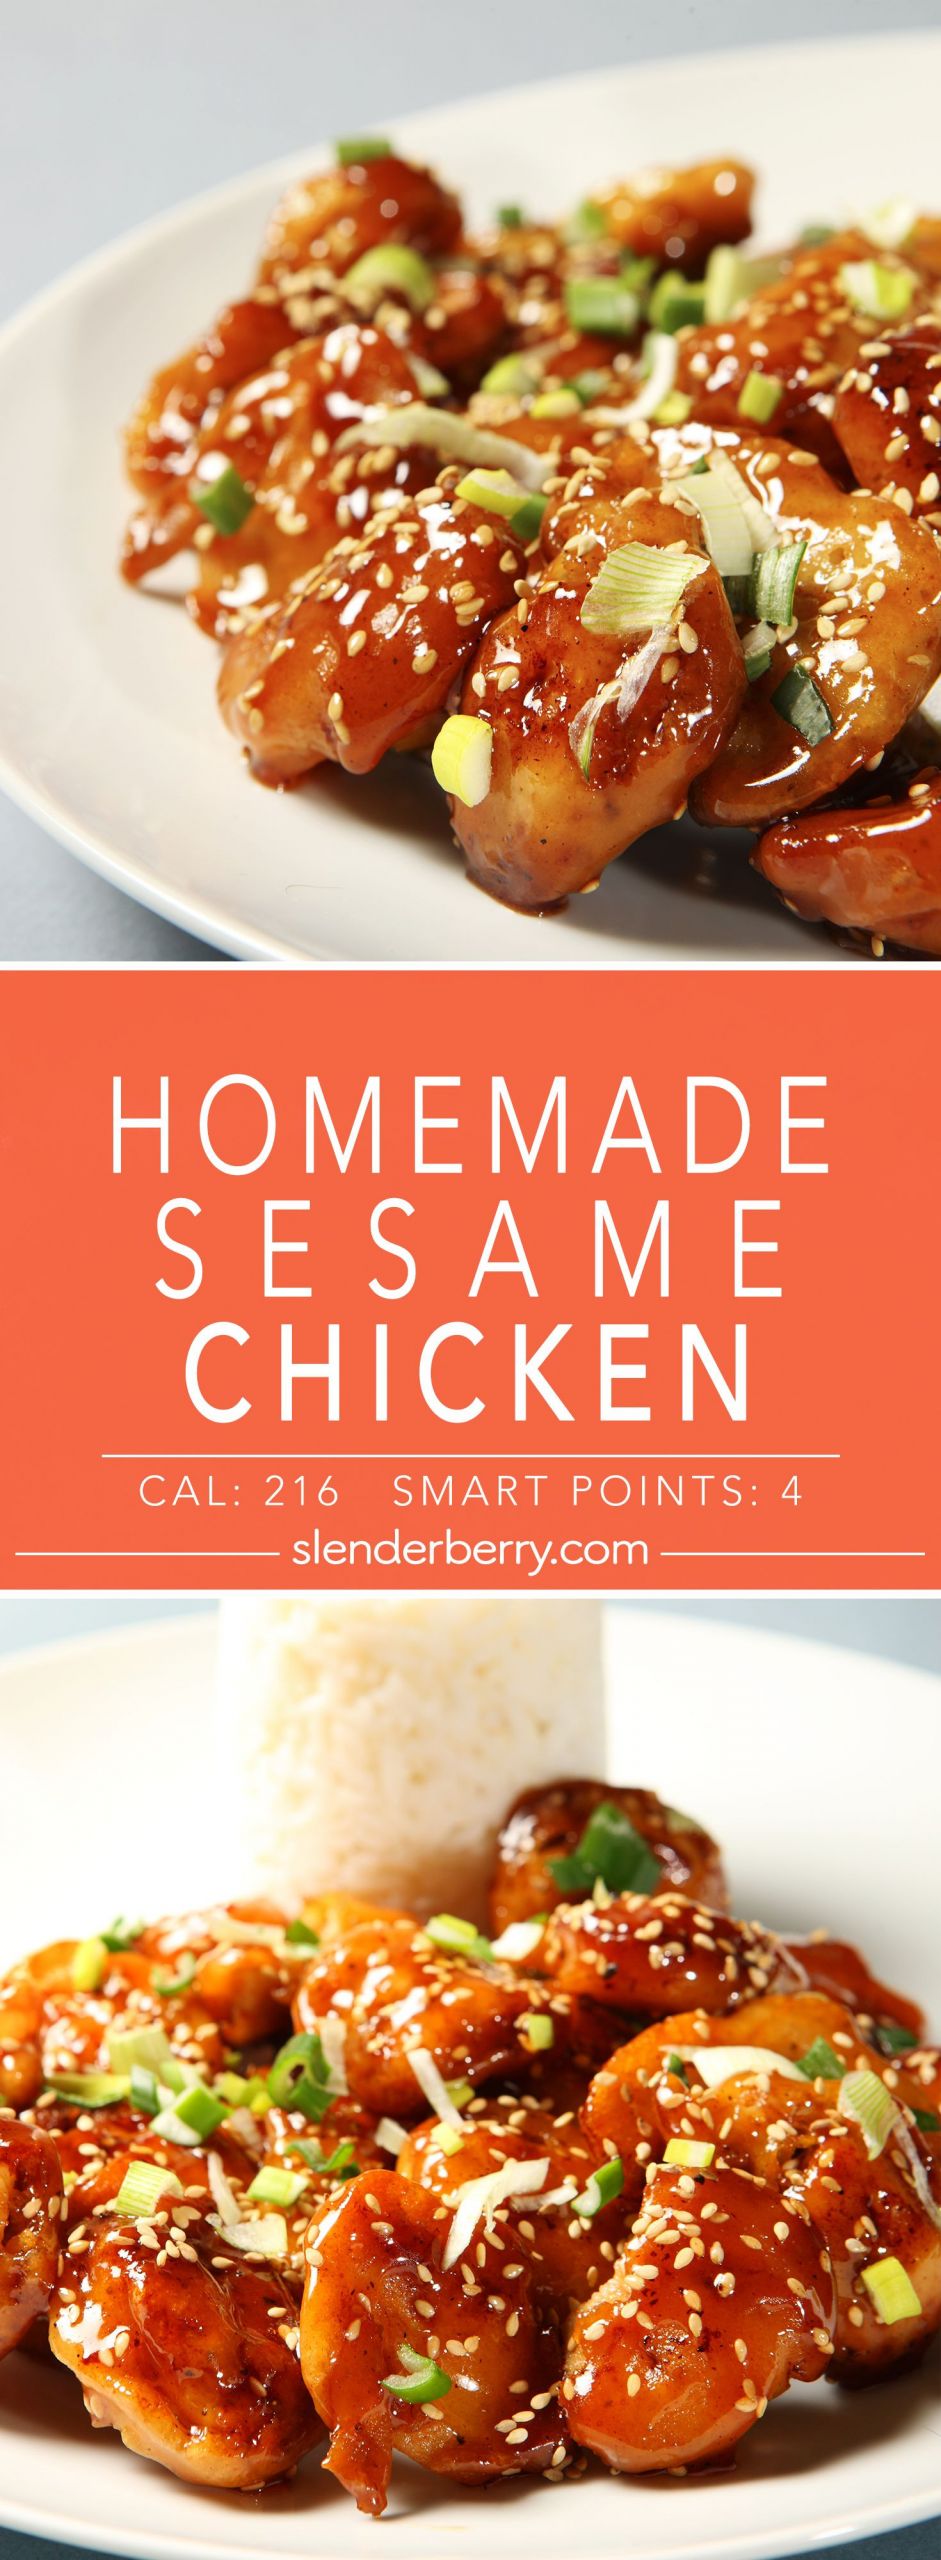 Low Calorie Chinese Recipes
 Homemade Sesame Chicken Recipe